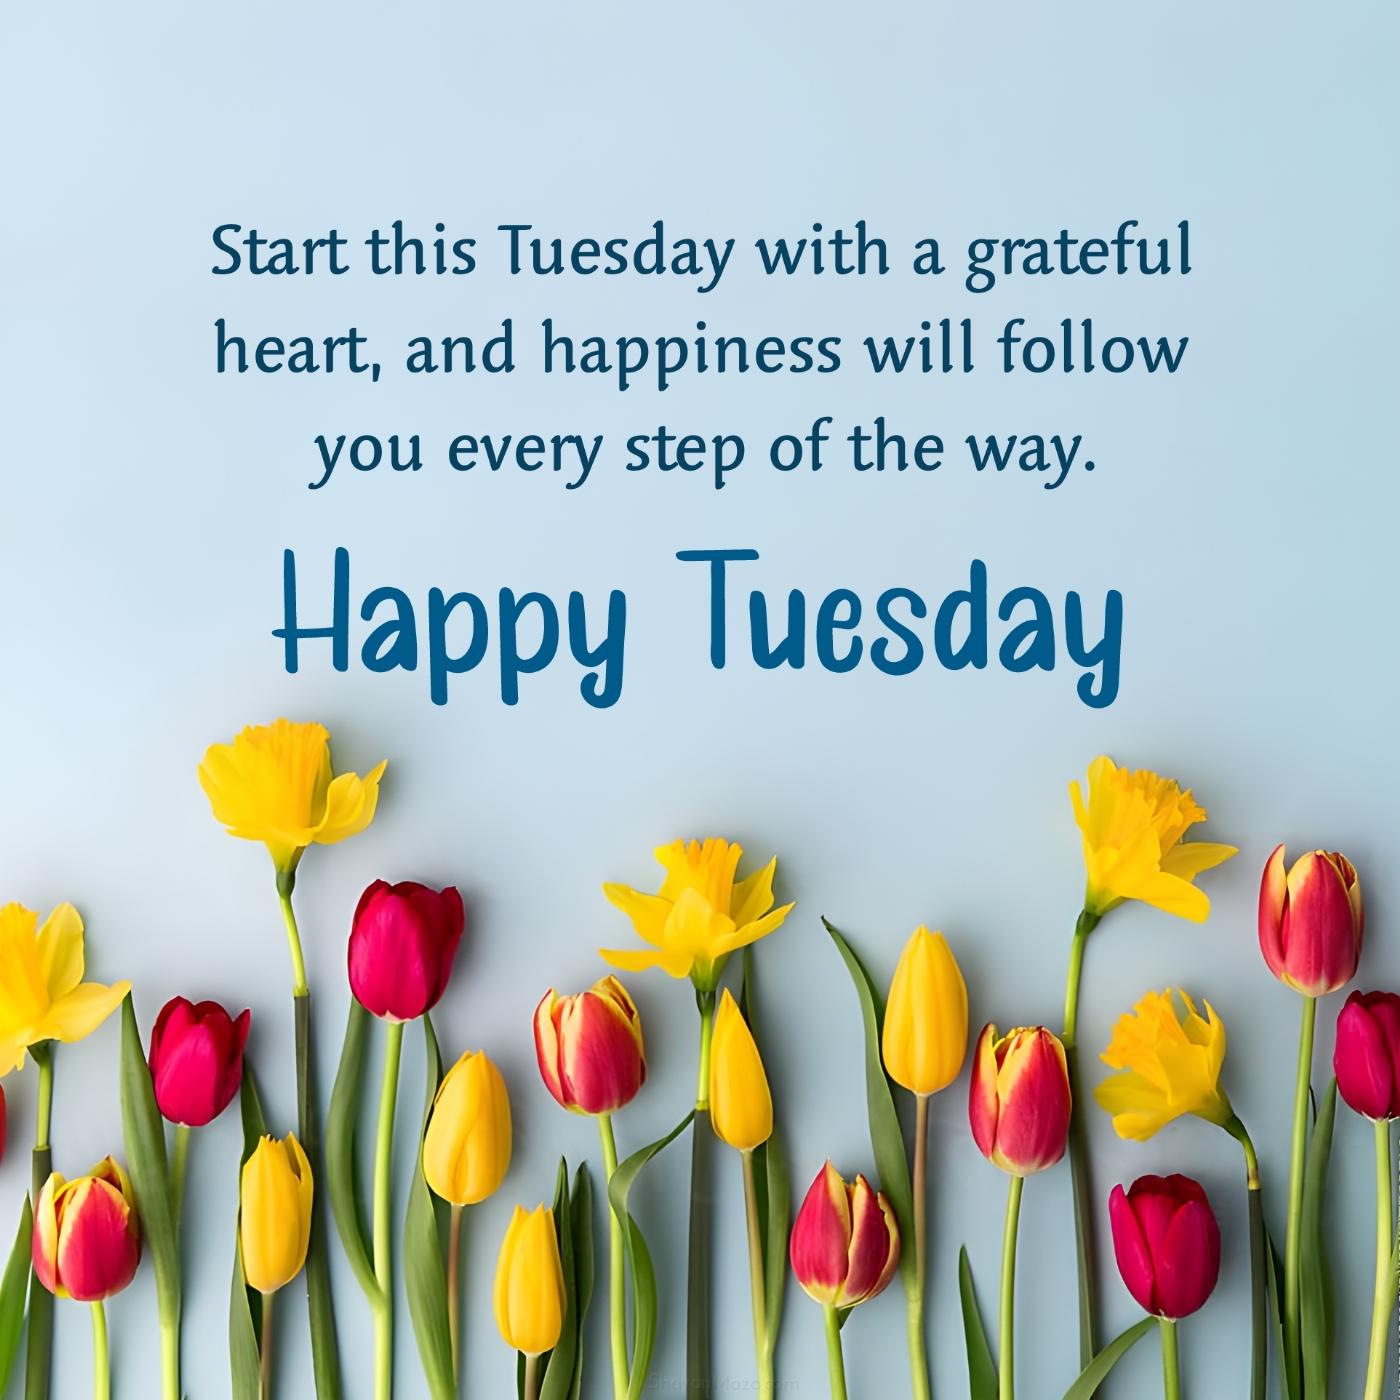 Start this Tuesday with a grateful heart and happiness